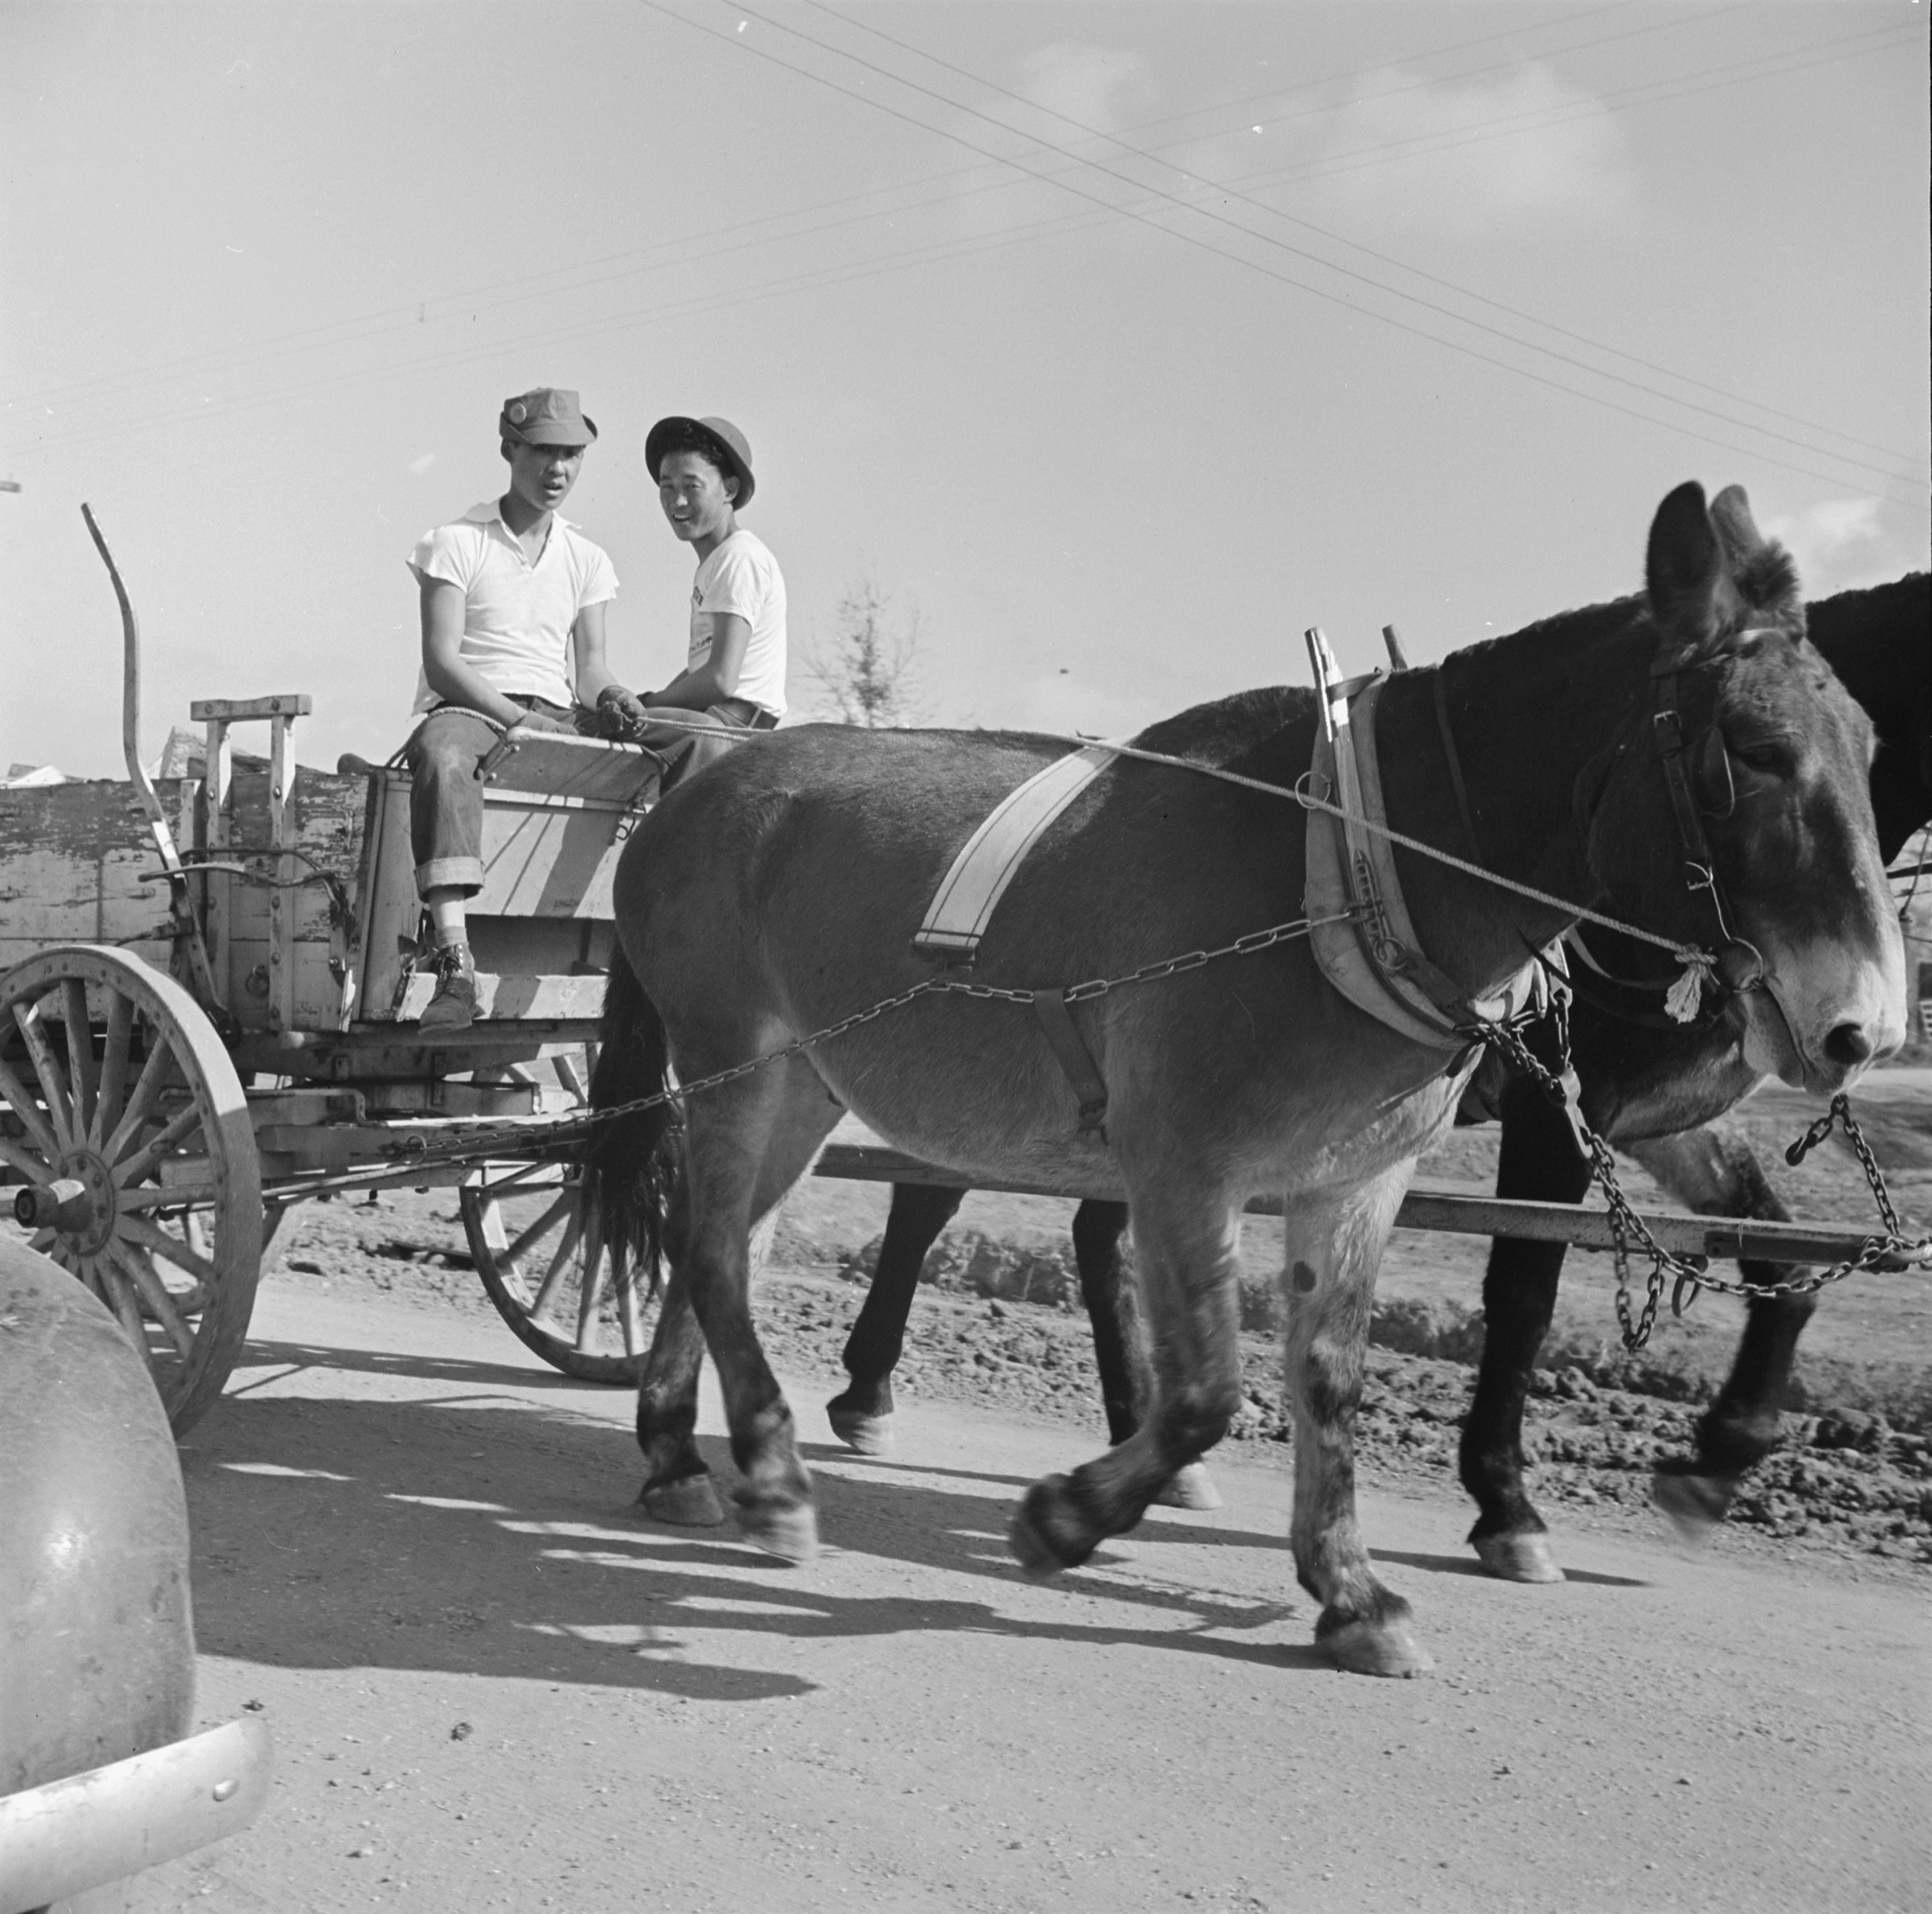 Mule wagon at Jerome War Relocation Center, Arkansas, United States, 18 Nov 1942, photo 5 of 6